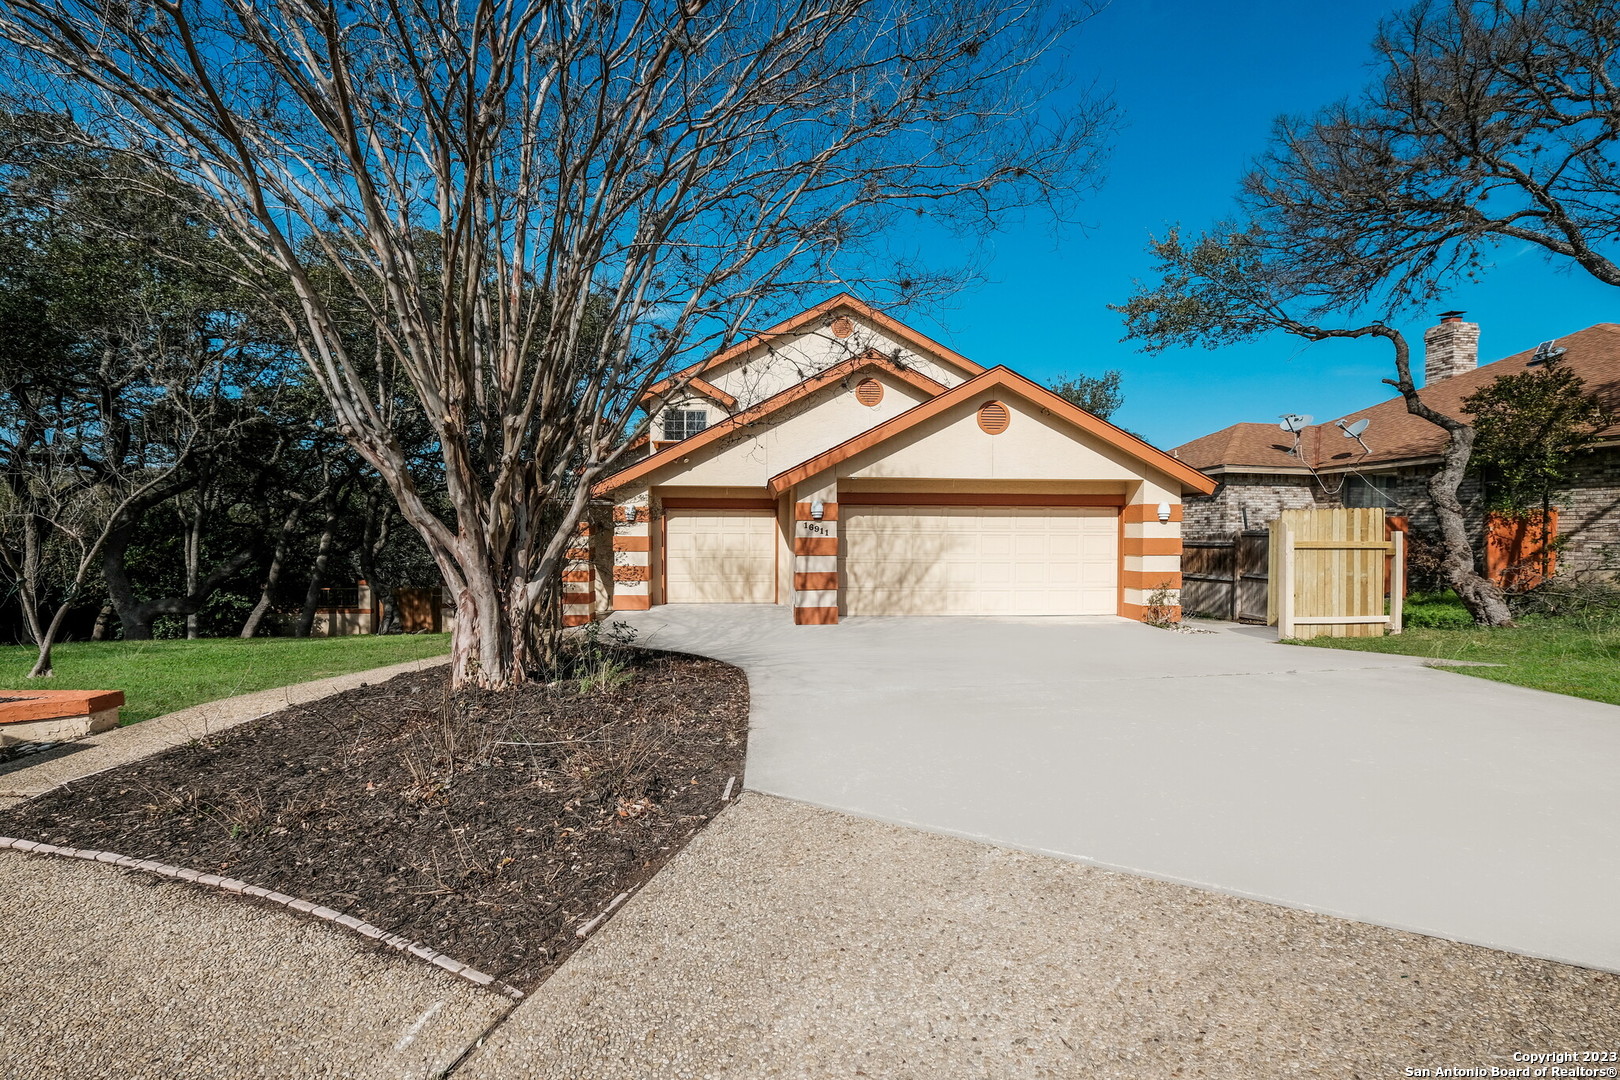 Open House Sat. 2/25/23 1- 4 PM.  Lovely Mediterranean Style home in Blanco Woods. Great location with very good schools, almost 1/2-acre (0.442 acres) homesite with multiple trees, multiple decks, beautiful landscaping, gorgeous country view and gazebo; cul-de-sac lot backing up to a true greenbelt. One bedroom downstairs, 3 upstairs. Spacious master bedroom featuring a separate sitting area that would be perfect for a nursery, exercise room or office. Oversized 2.5 car garage has plenty of space for a workshop, golf cart or extra storage area. This home is an entertainer's delight. Don't miss out on viewing multiple attics with entry through a closet door in upstairs bedroom. You will be surprised to find so much storage space.